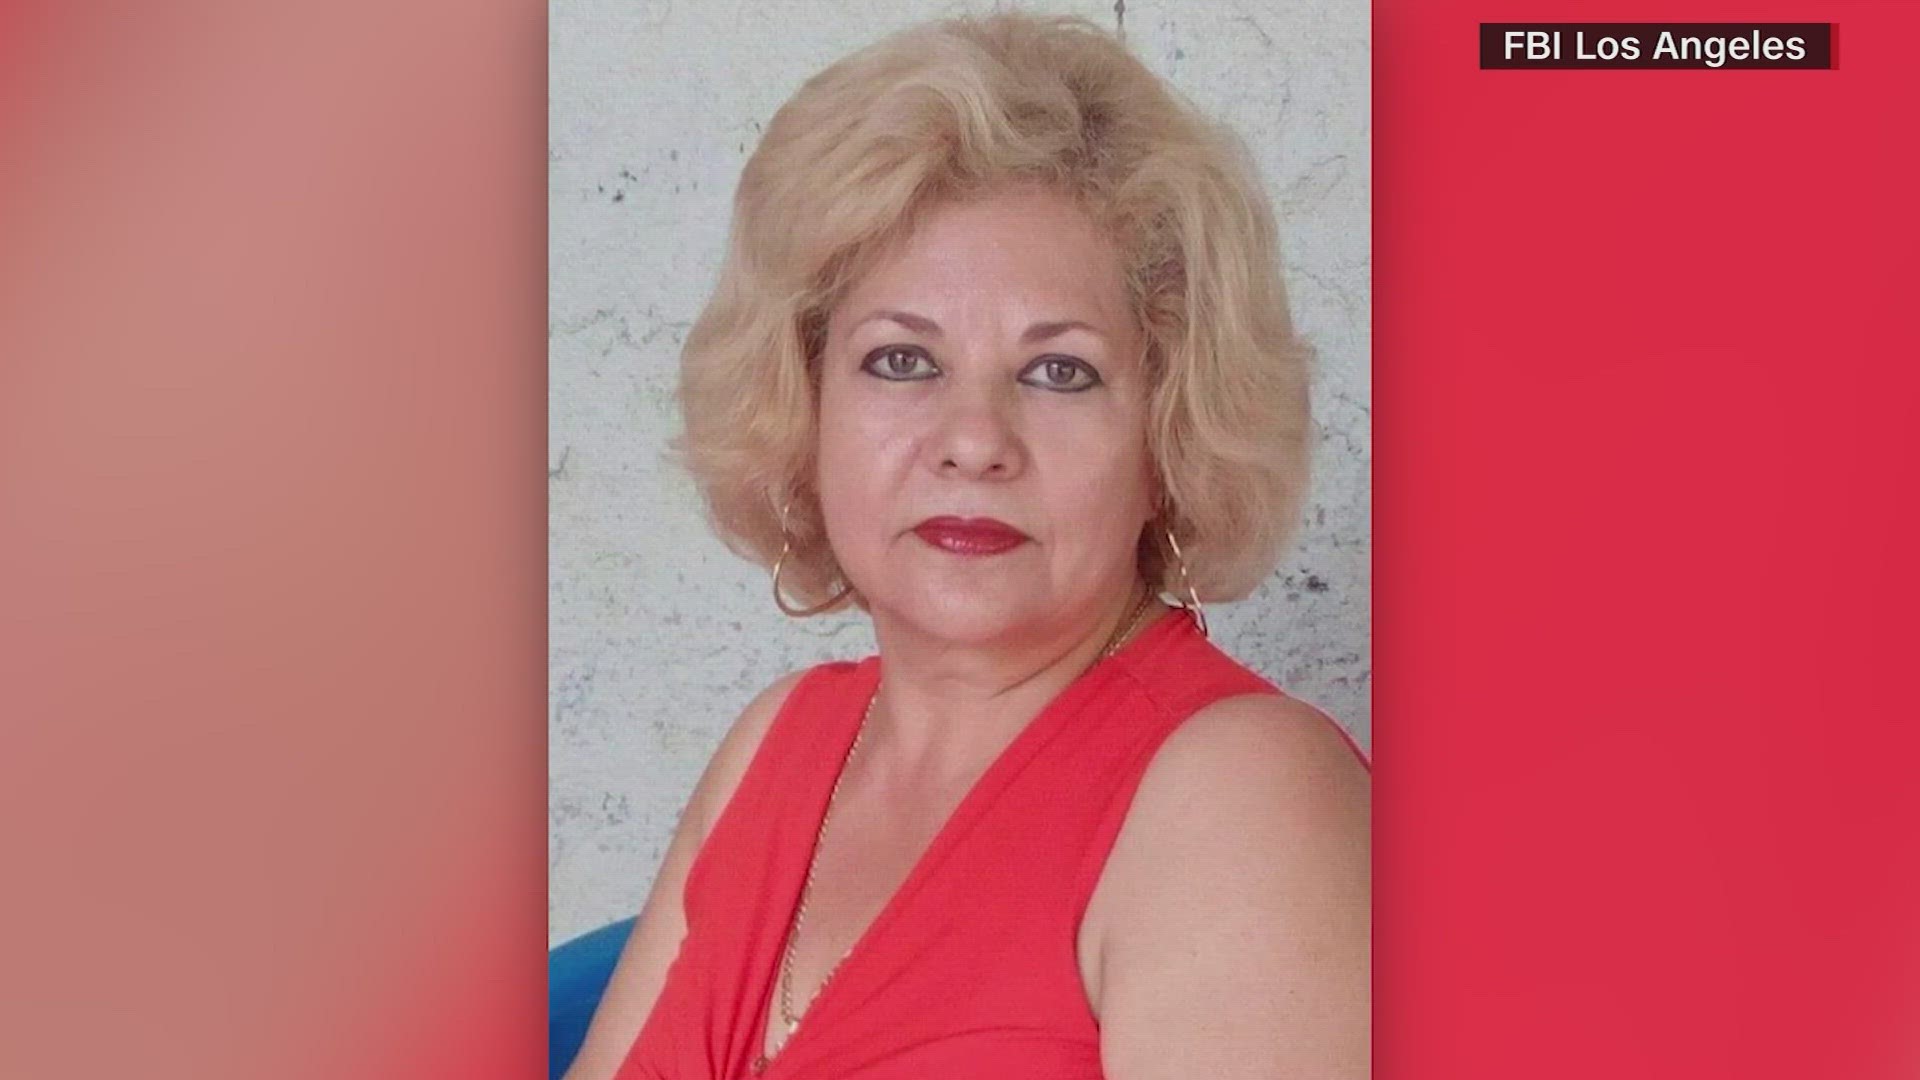 Maria was taken from her home in Mexico on Feb. 9.